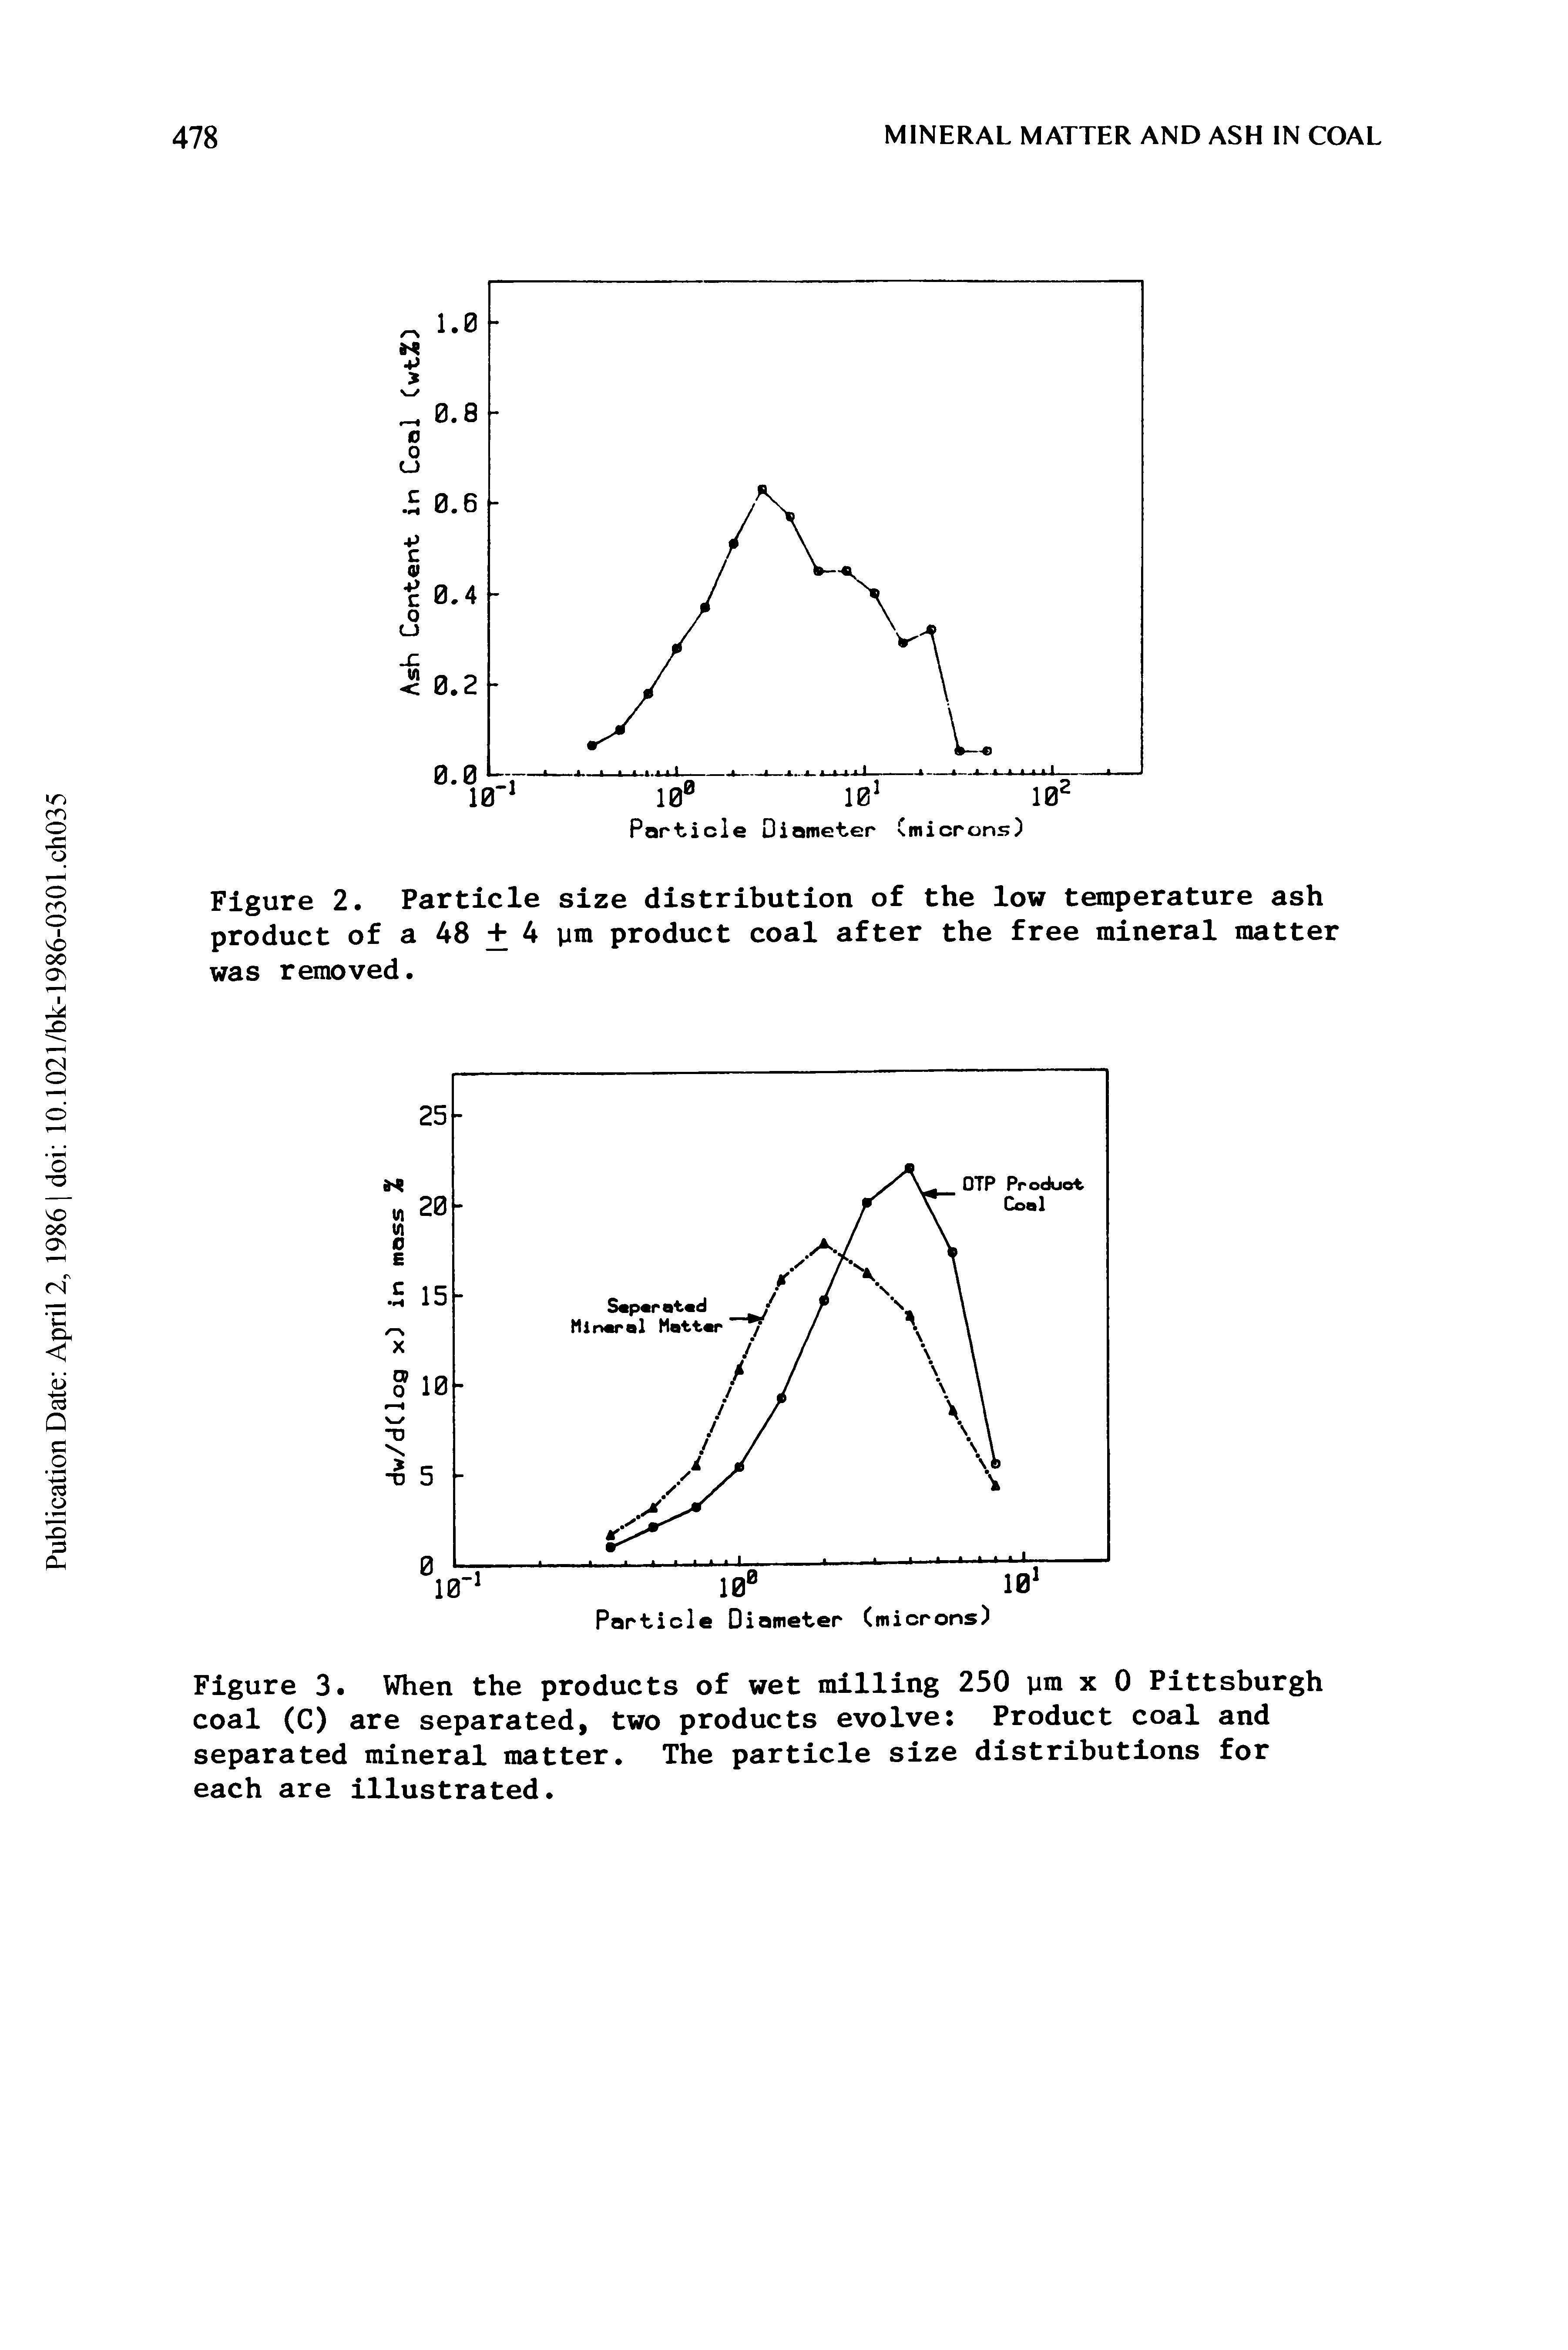 Figure 3. When the products of wet milling 250 pm x 0 Pittsburgh coal (C) are separated, two products evolve Product coal and separated mineral matter. The particle size distributions for each are illustrated.